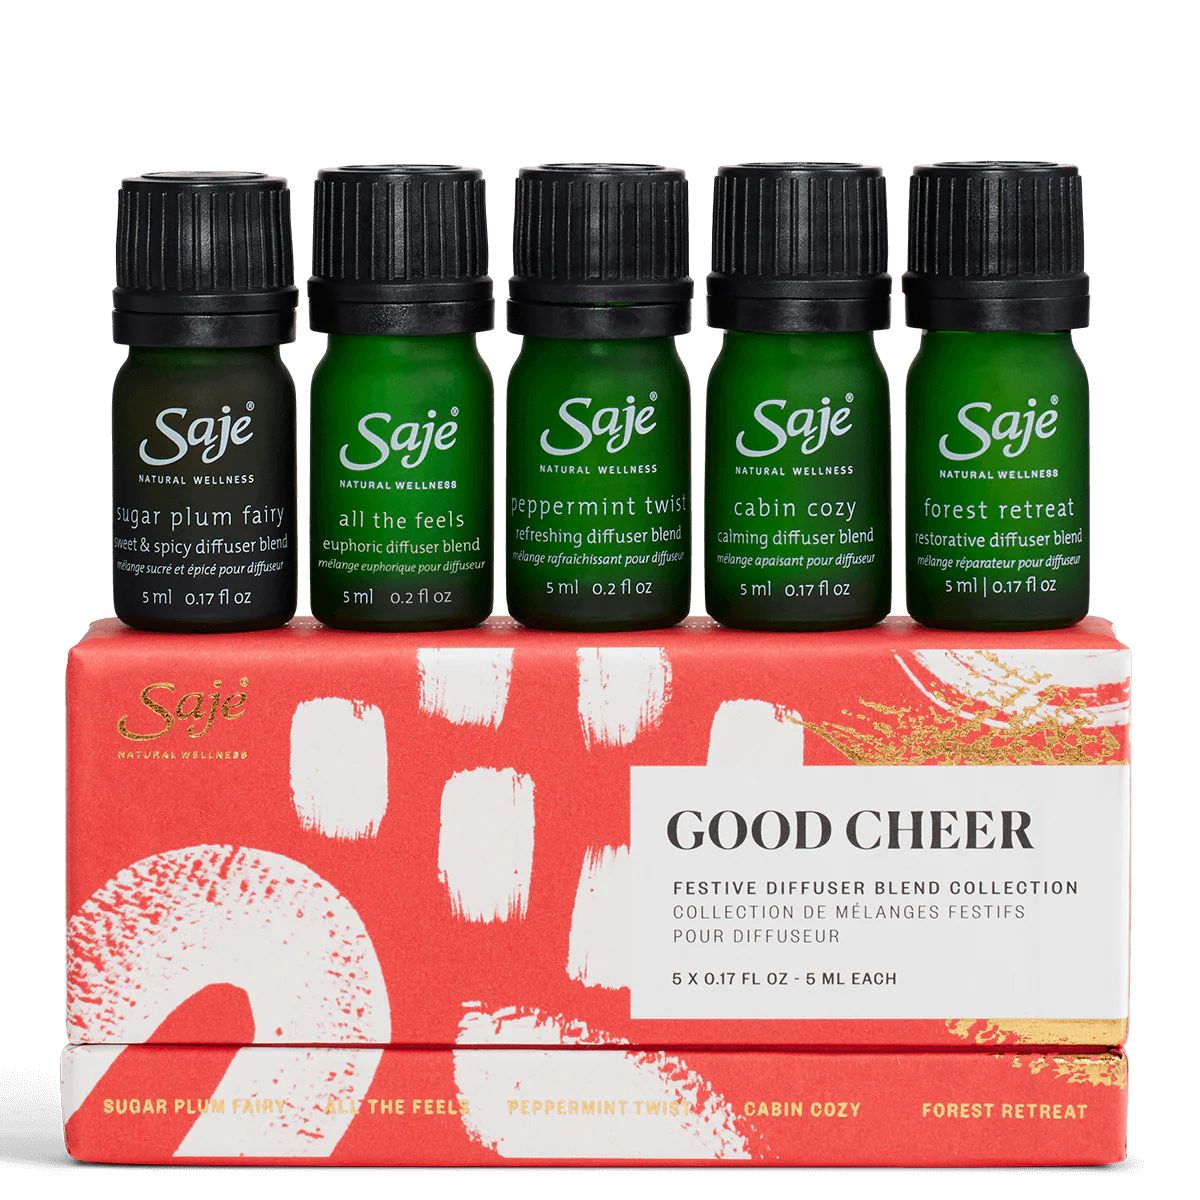 Good Cheer Diffuser Blend Collection | Saje Wellness